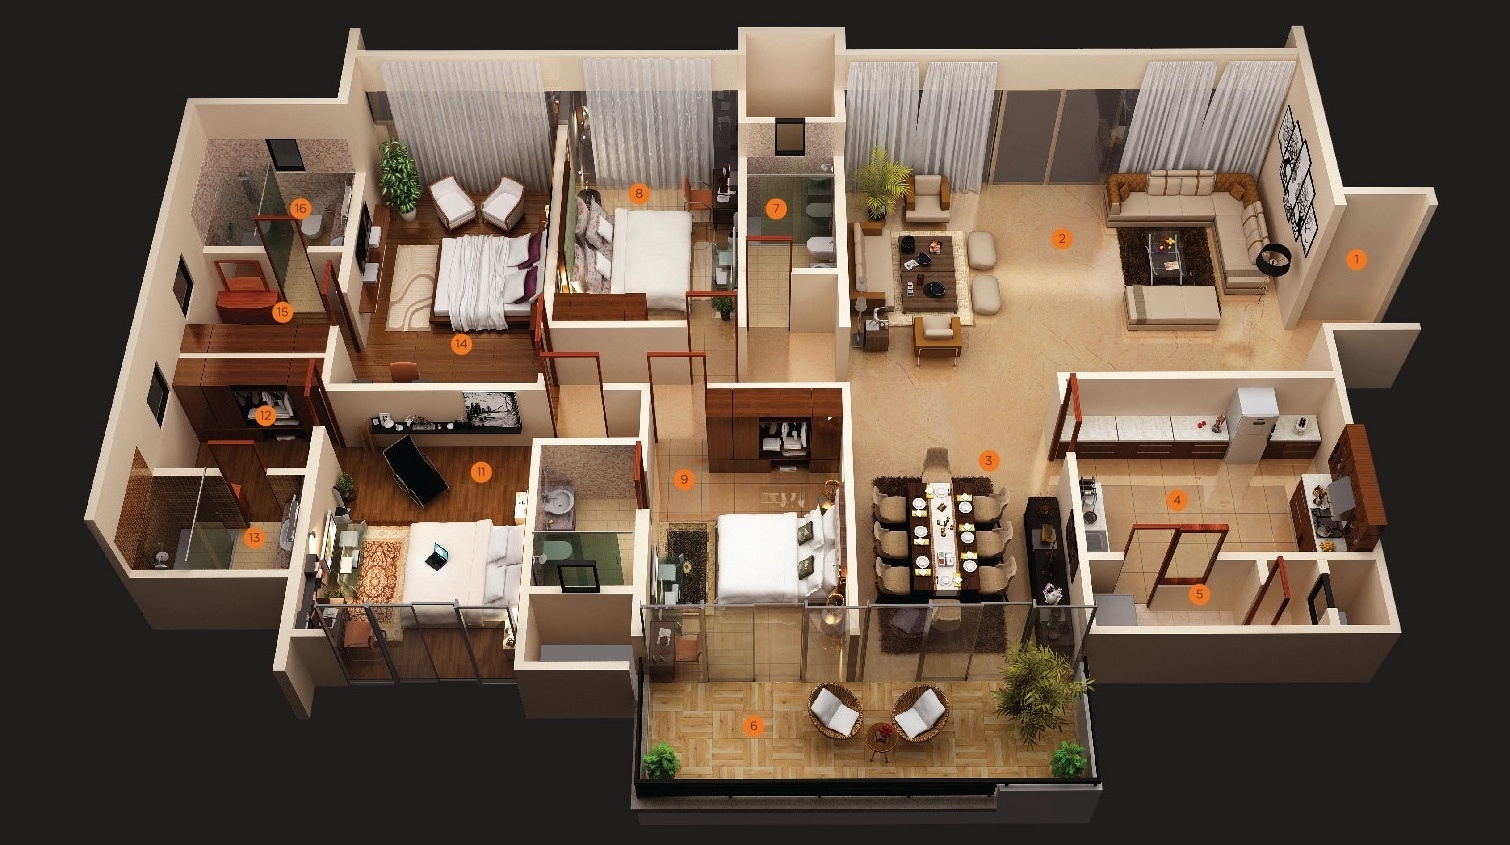 Remarkable duplex home plans and designs | homesfeed with regard to room design floor plan